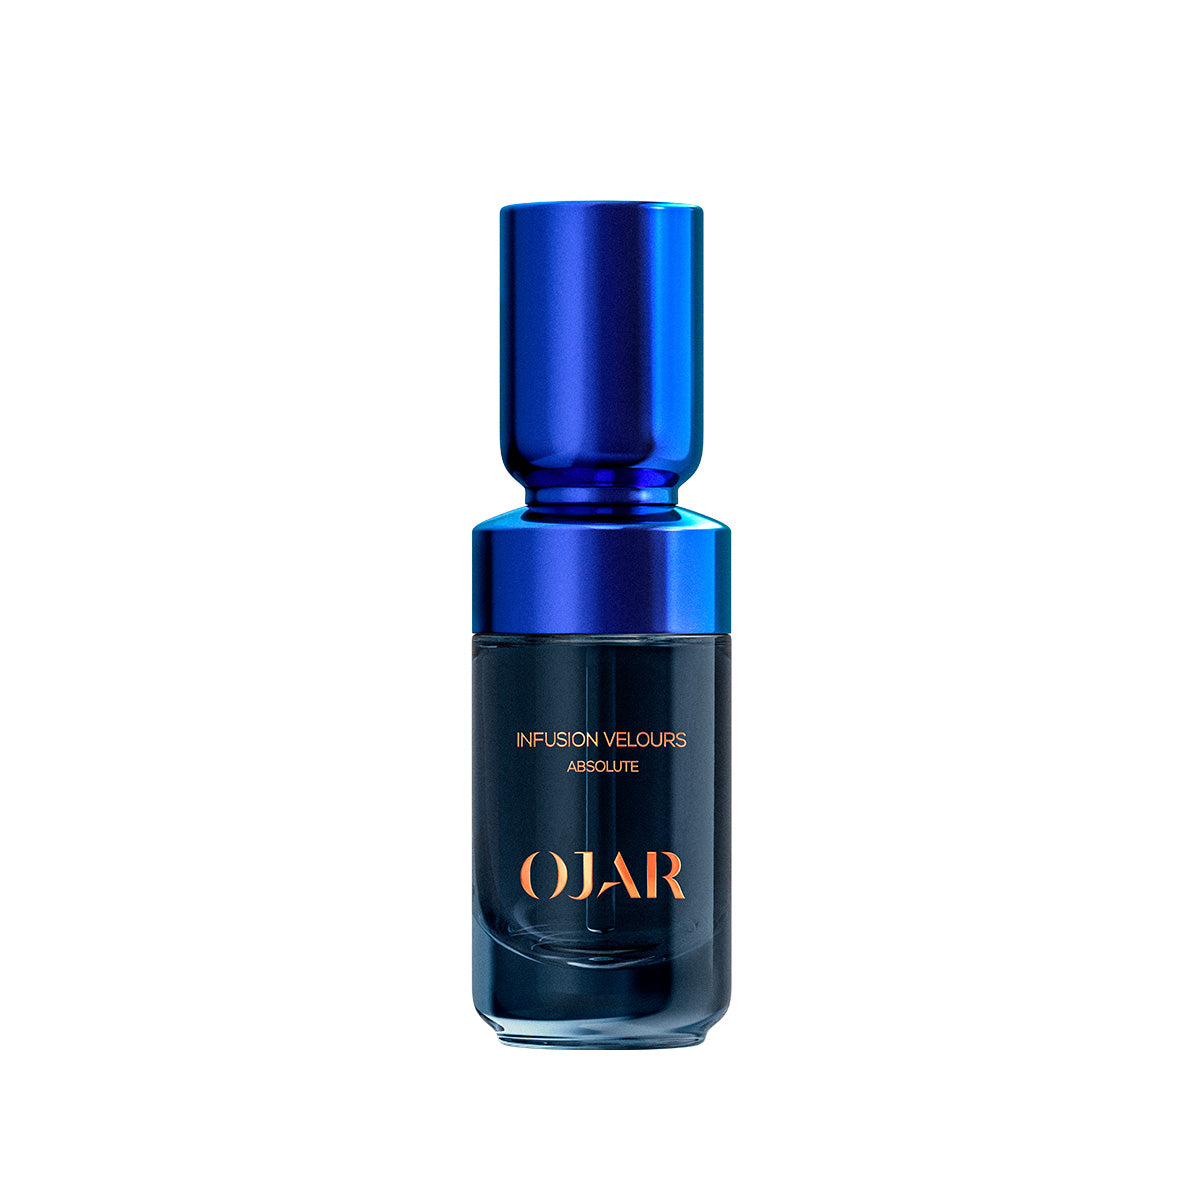 Infusion Velours - OJAR - Absolute 20ml